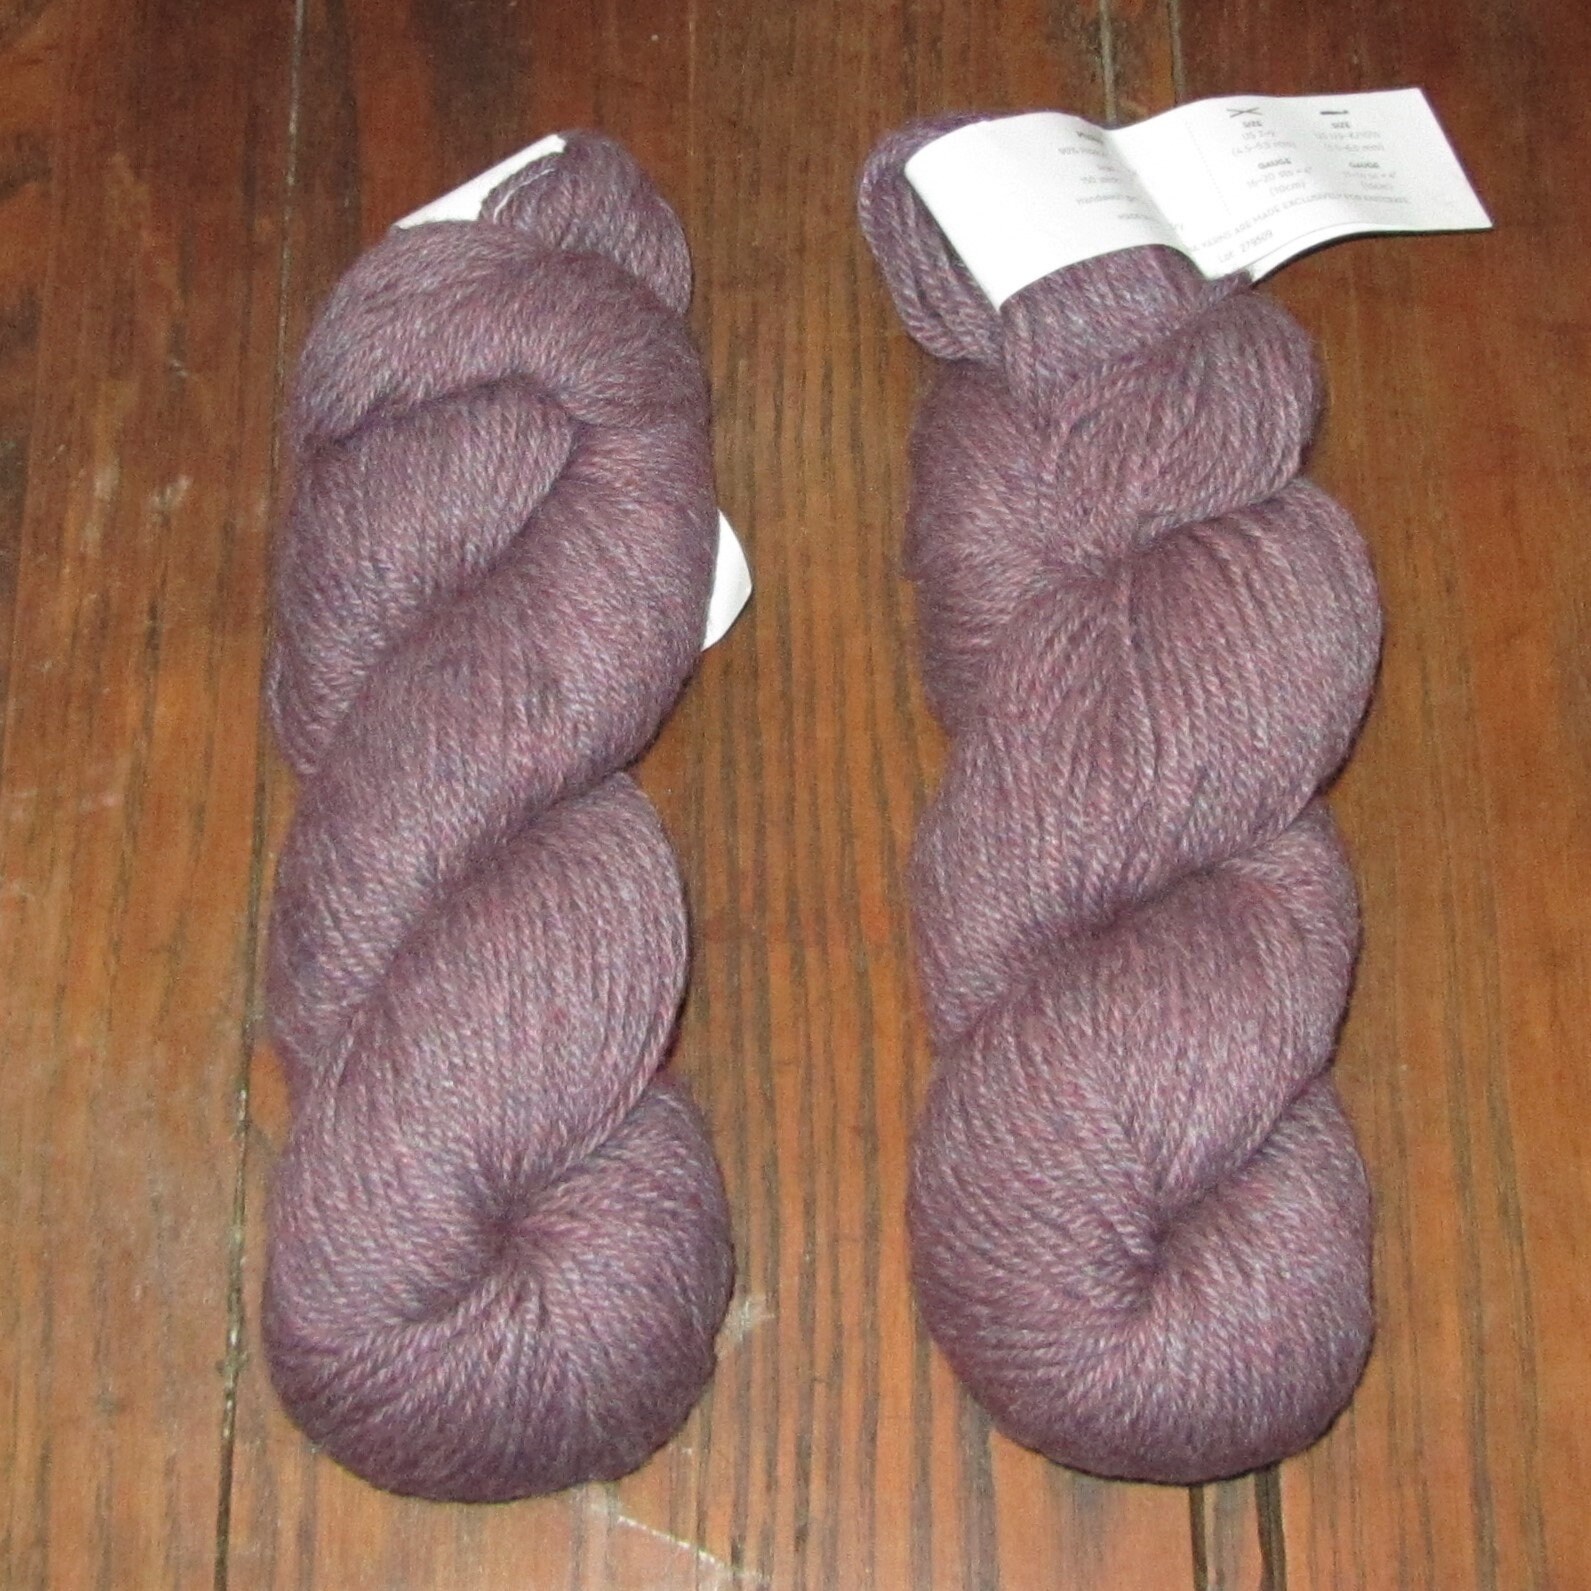 San Luis Valley 3-Ply Worsted Weight Yarns - Chelle Colorado